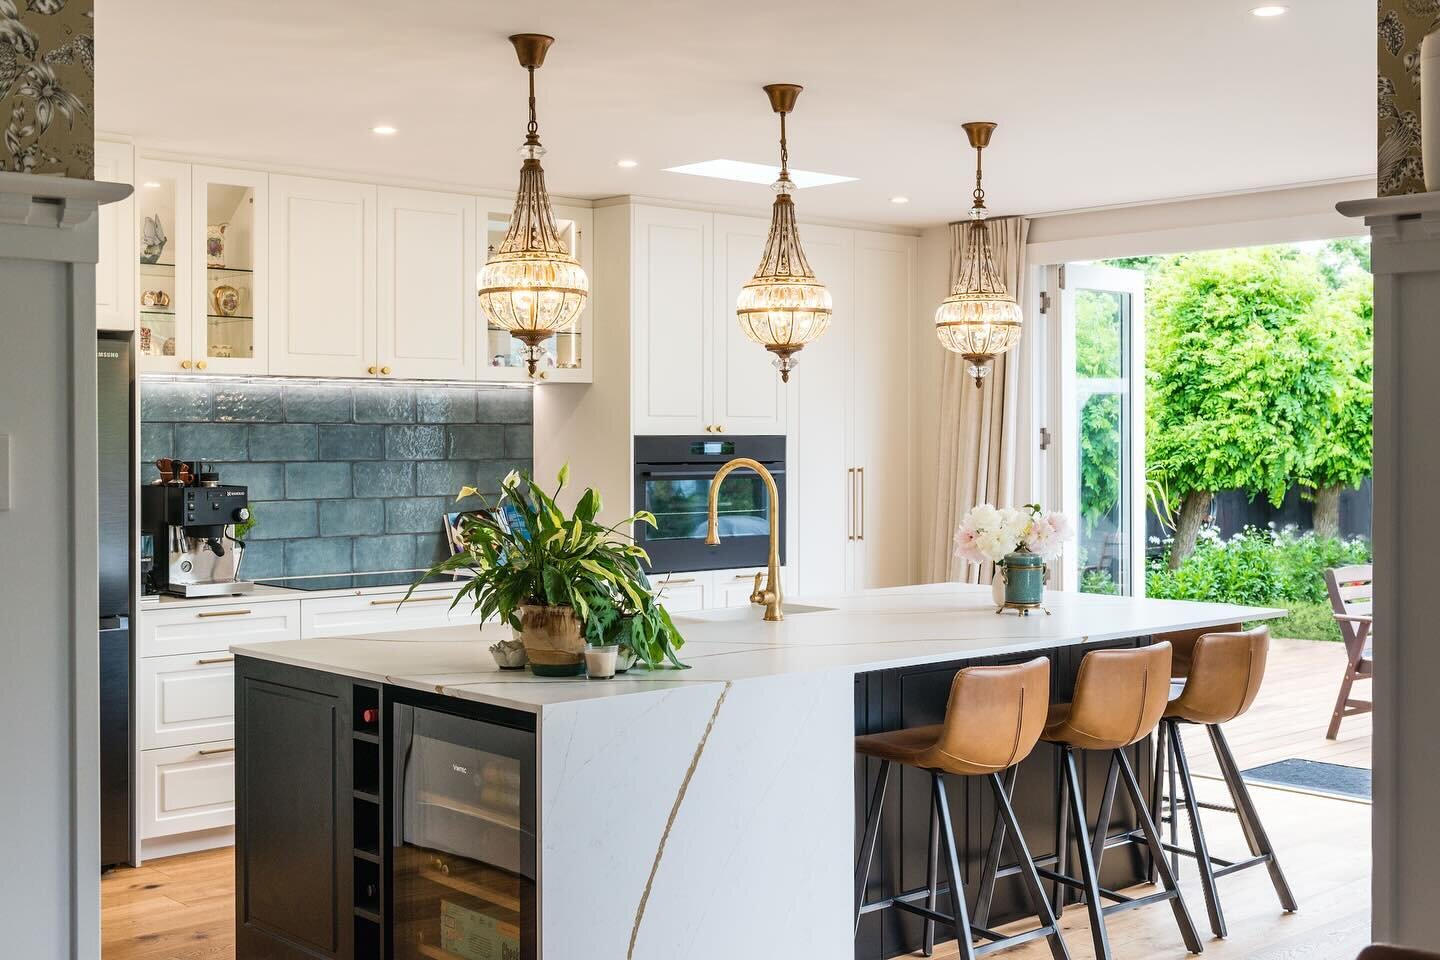 Beautiful heritage kitchen, full of character and detail. The unique, lacquered profile was inspired by the client&rsquo;s butler bowl 💙

Photography by @kateclaridgephotography 

#ryanskitchens #kitchendesign #kitchendesignnz #interiordesign #shake